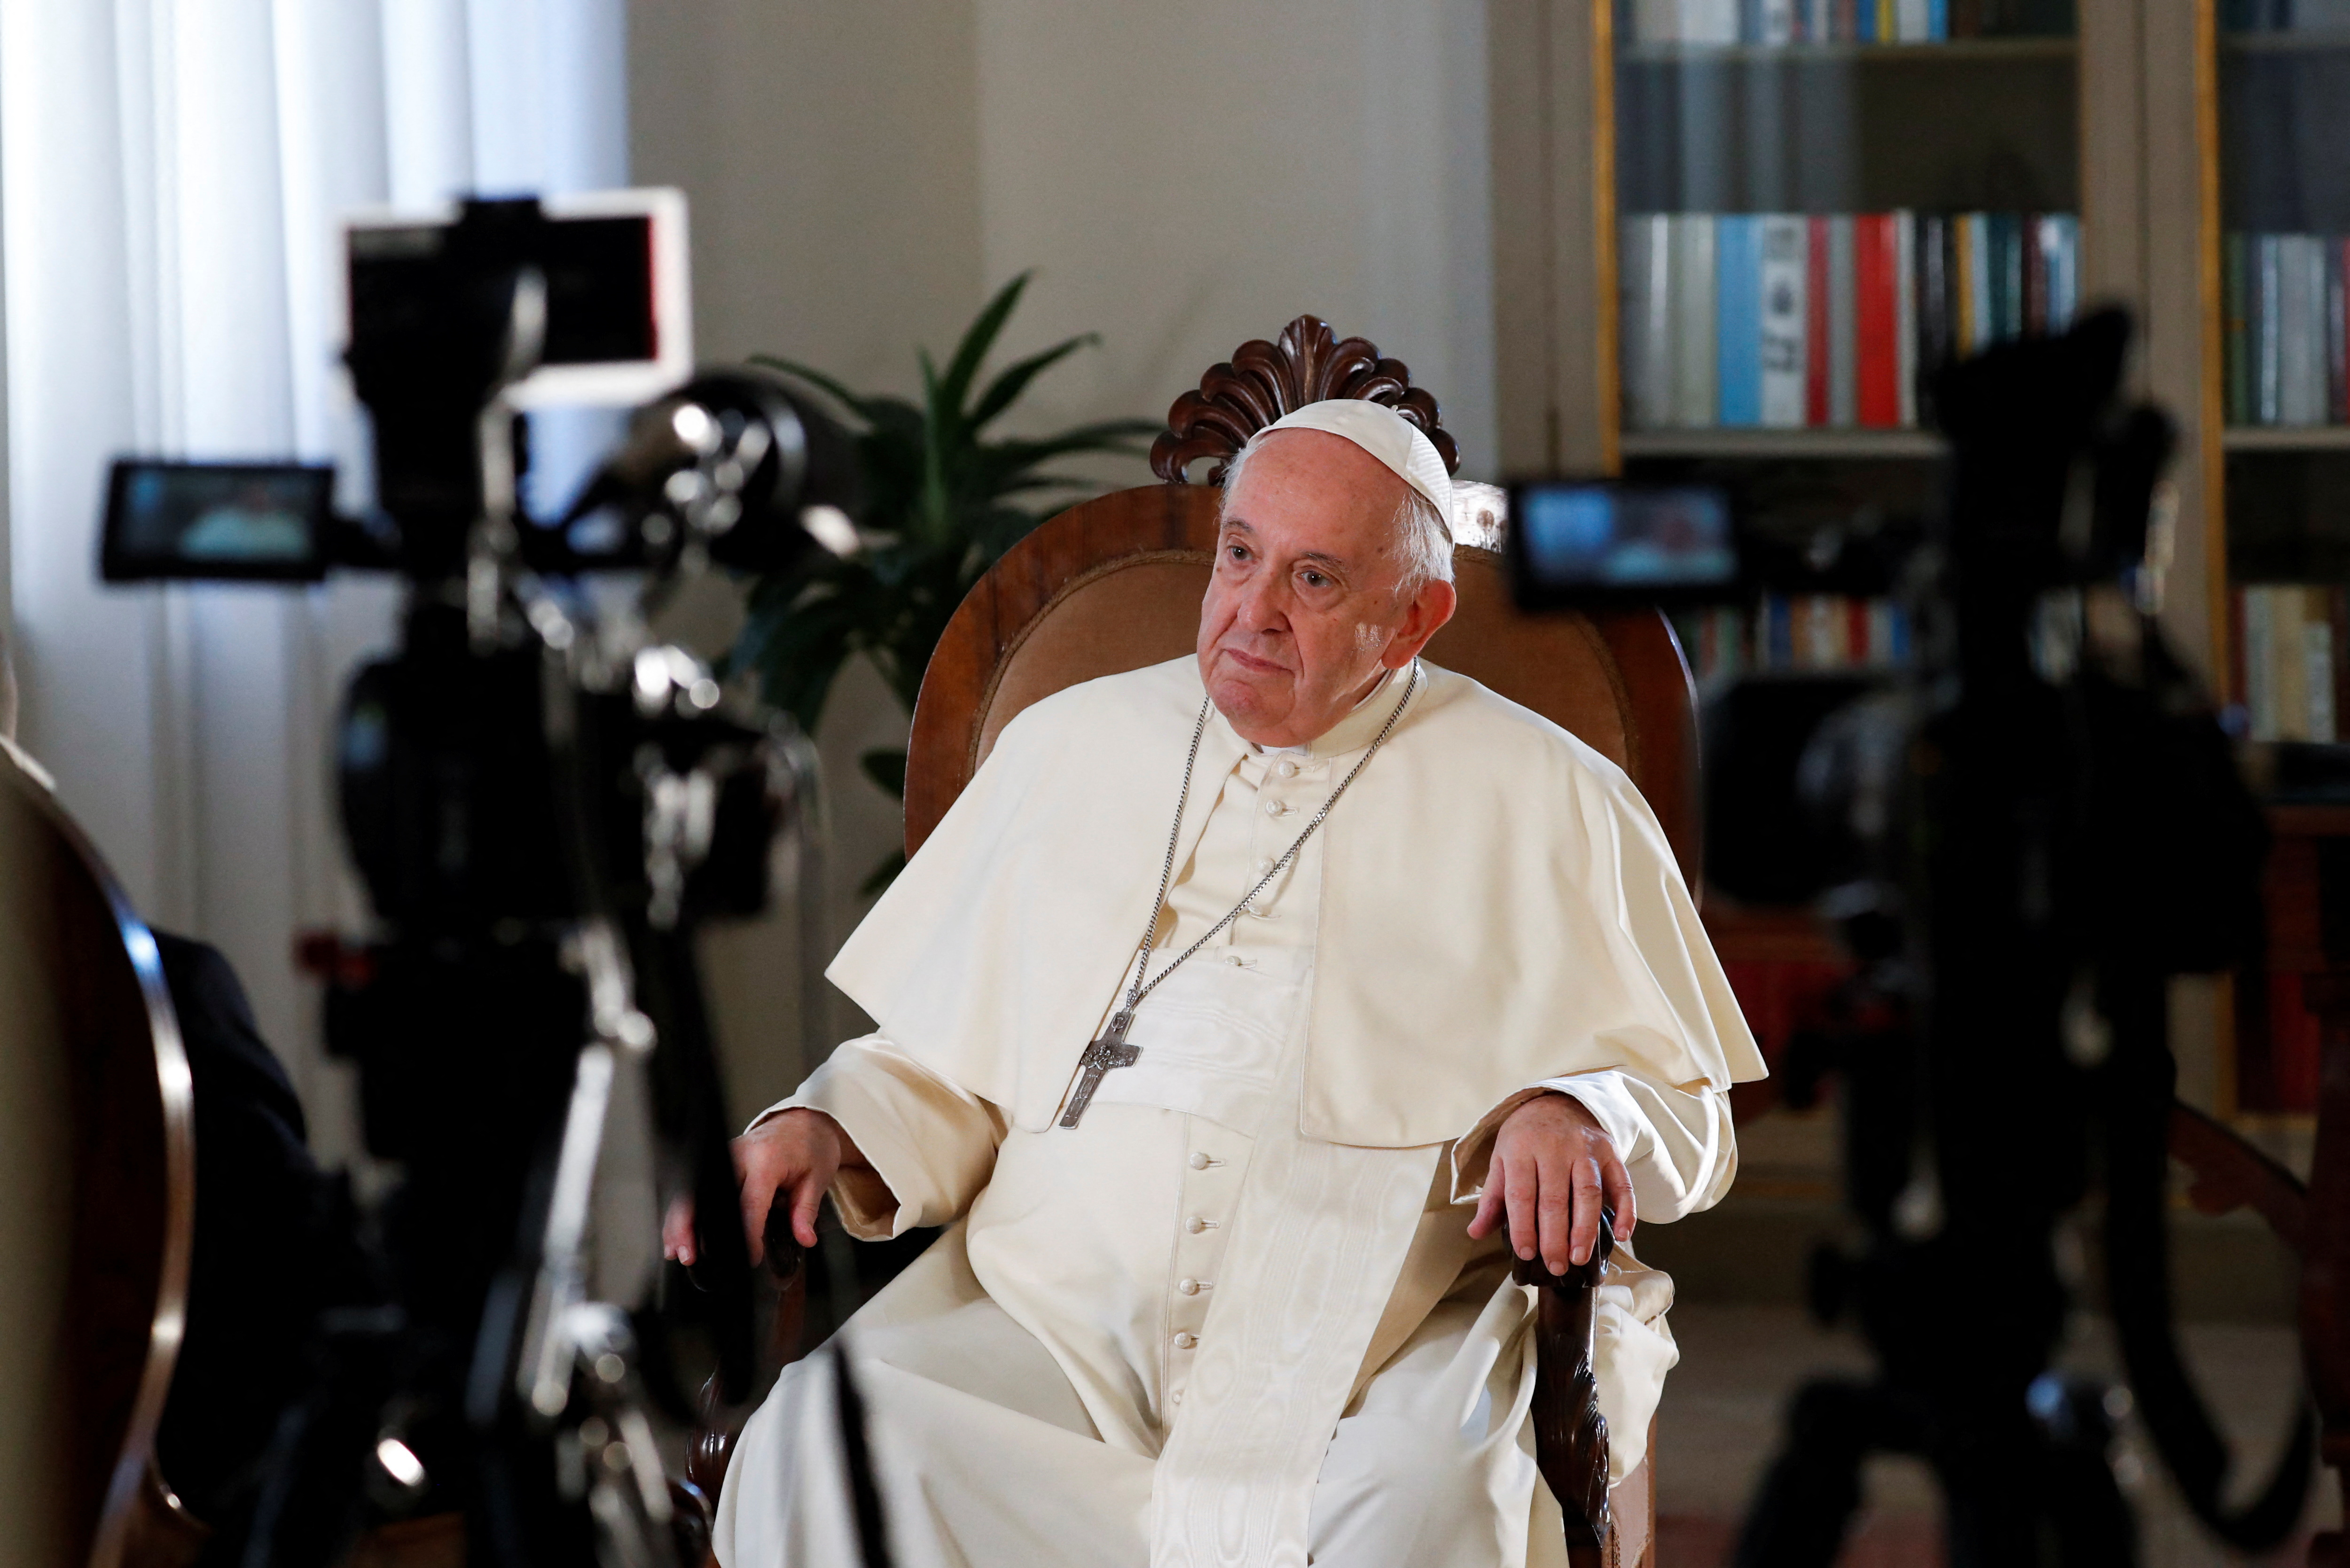 Reuters exclusive interview with Pope Francis at the Vatican